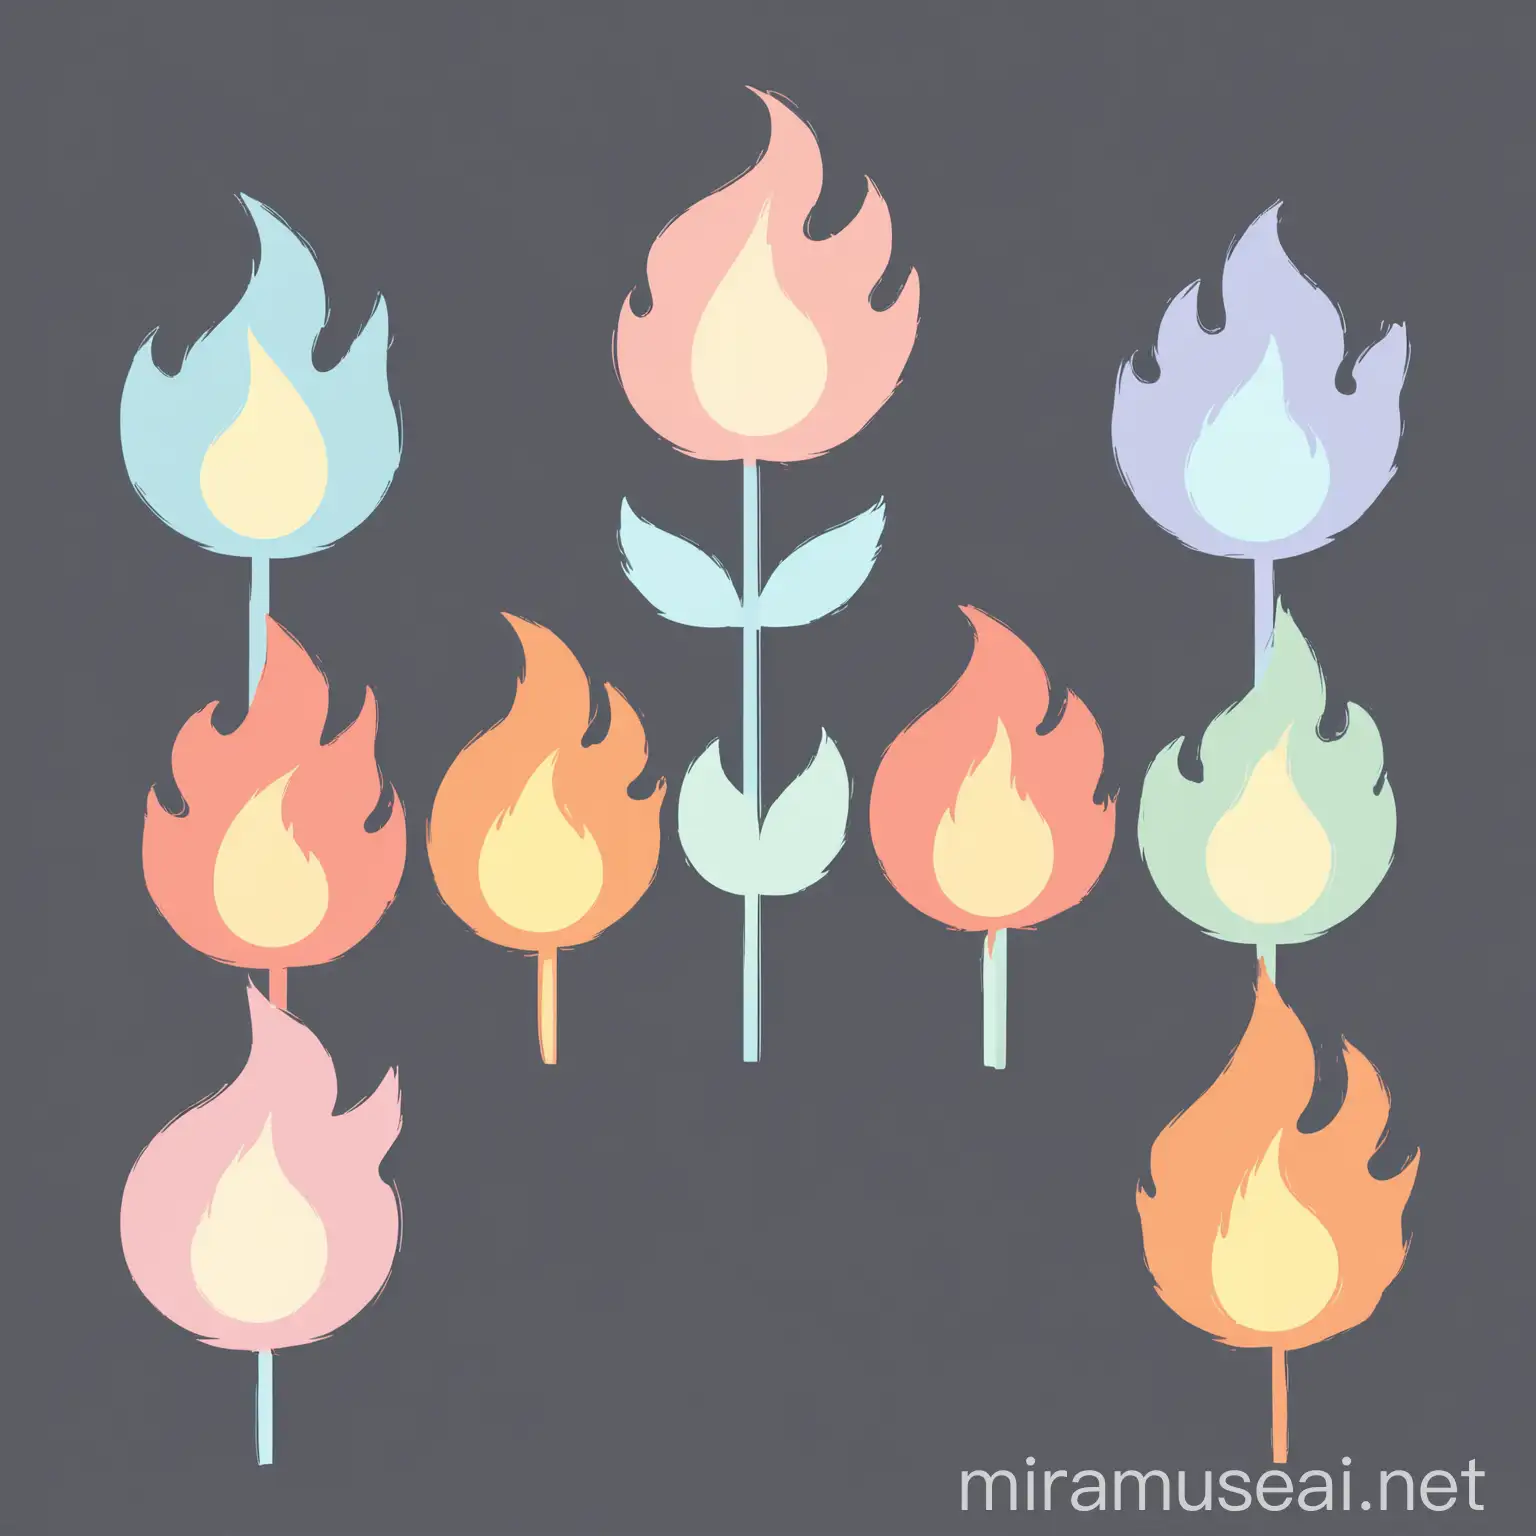 Illustration, vector, flatcolor, no background, Minimalist, simple, cutie mark, pastel colors, colorful, pretty, simple, Simple flower, simple flower and flatcolor fire, not particles, not faces, Single figure, logo, logo style, without text 